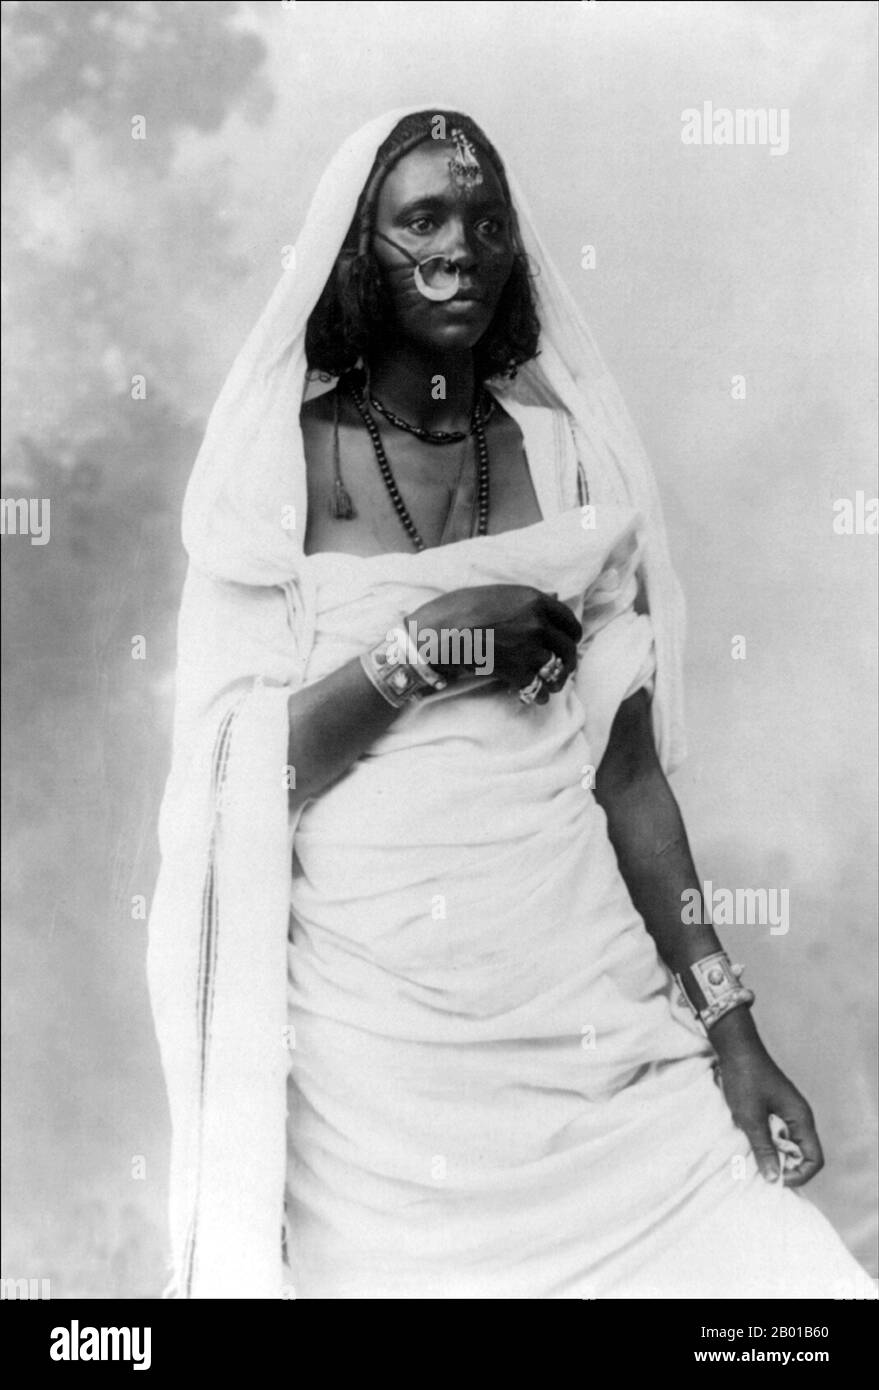 Sudan: Nubian woman. Photo by Jean Pascal Sebah (1872 - 6 June 1947), c. 1890-1923.  Nubia is a region along the Nile, in northern Sudan and southern Egypt.  There were a number of small Nubian kingdoms throughout the Middle Ages, the last of which collapsed in 1504, when Nubia became divided between Egypt and the Sennar sultanate resulting in the Arabization of much of the Nubian population. Nubia was again united within Ottoman Egypt in the 19th century, and within Anglo-Egyptian Sudan from 1899 to 1956.  The name Nubia is derived from that of the Noba people. Stock Photo